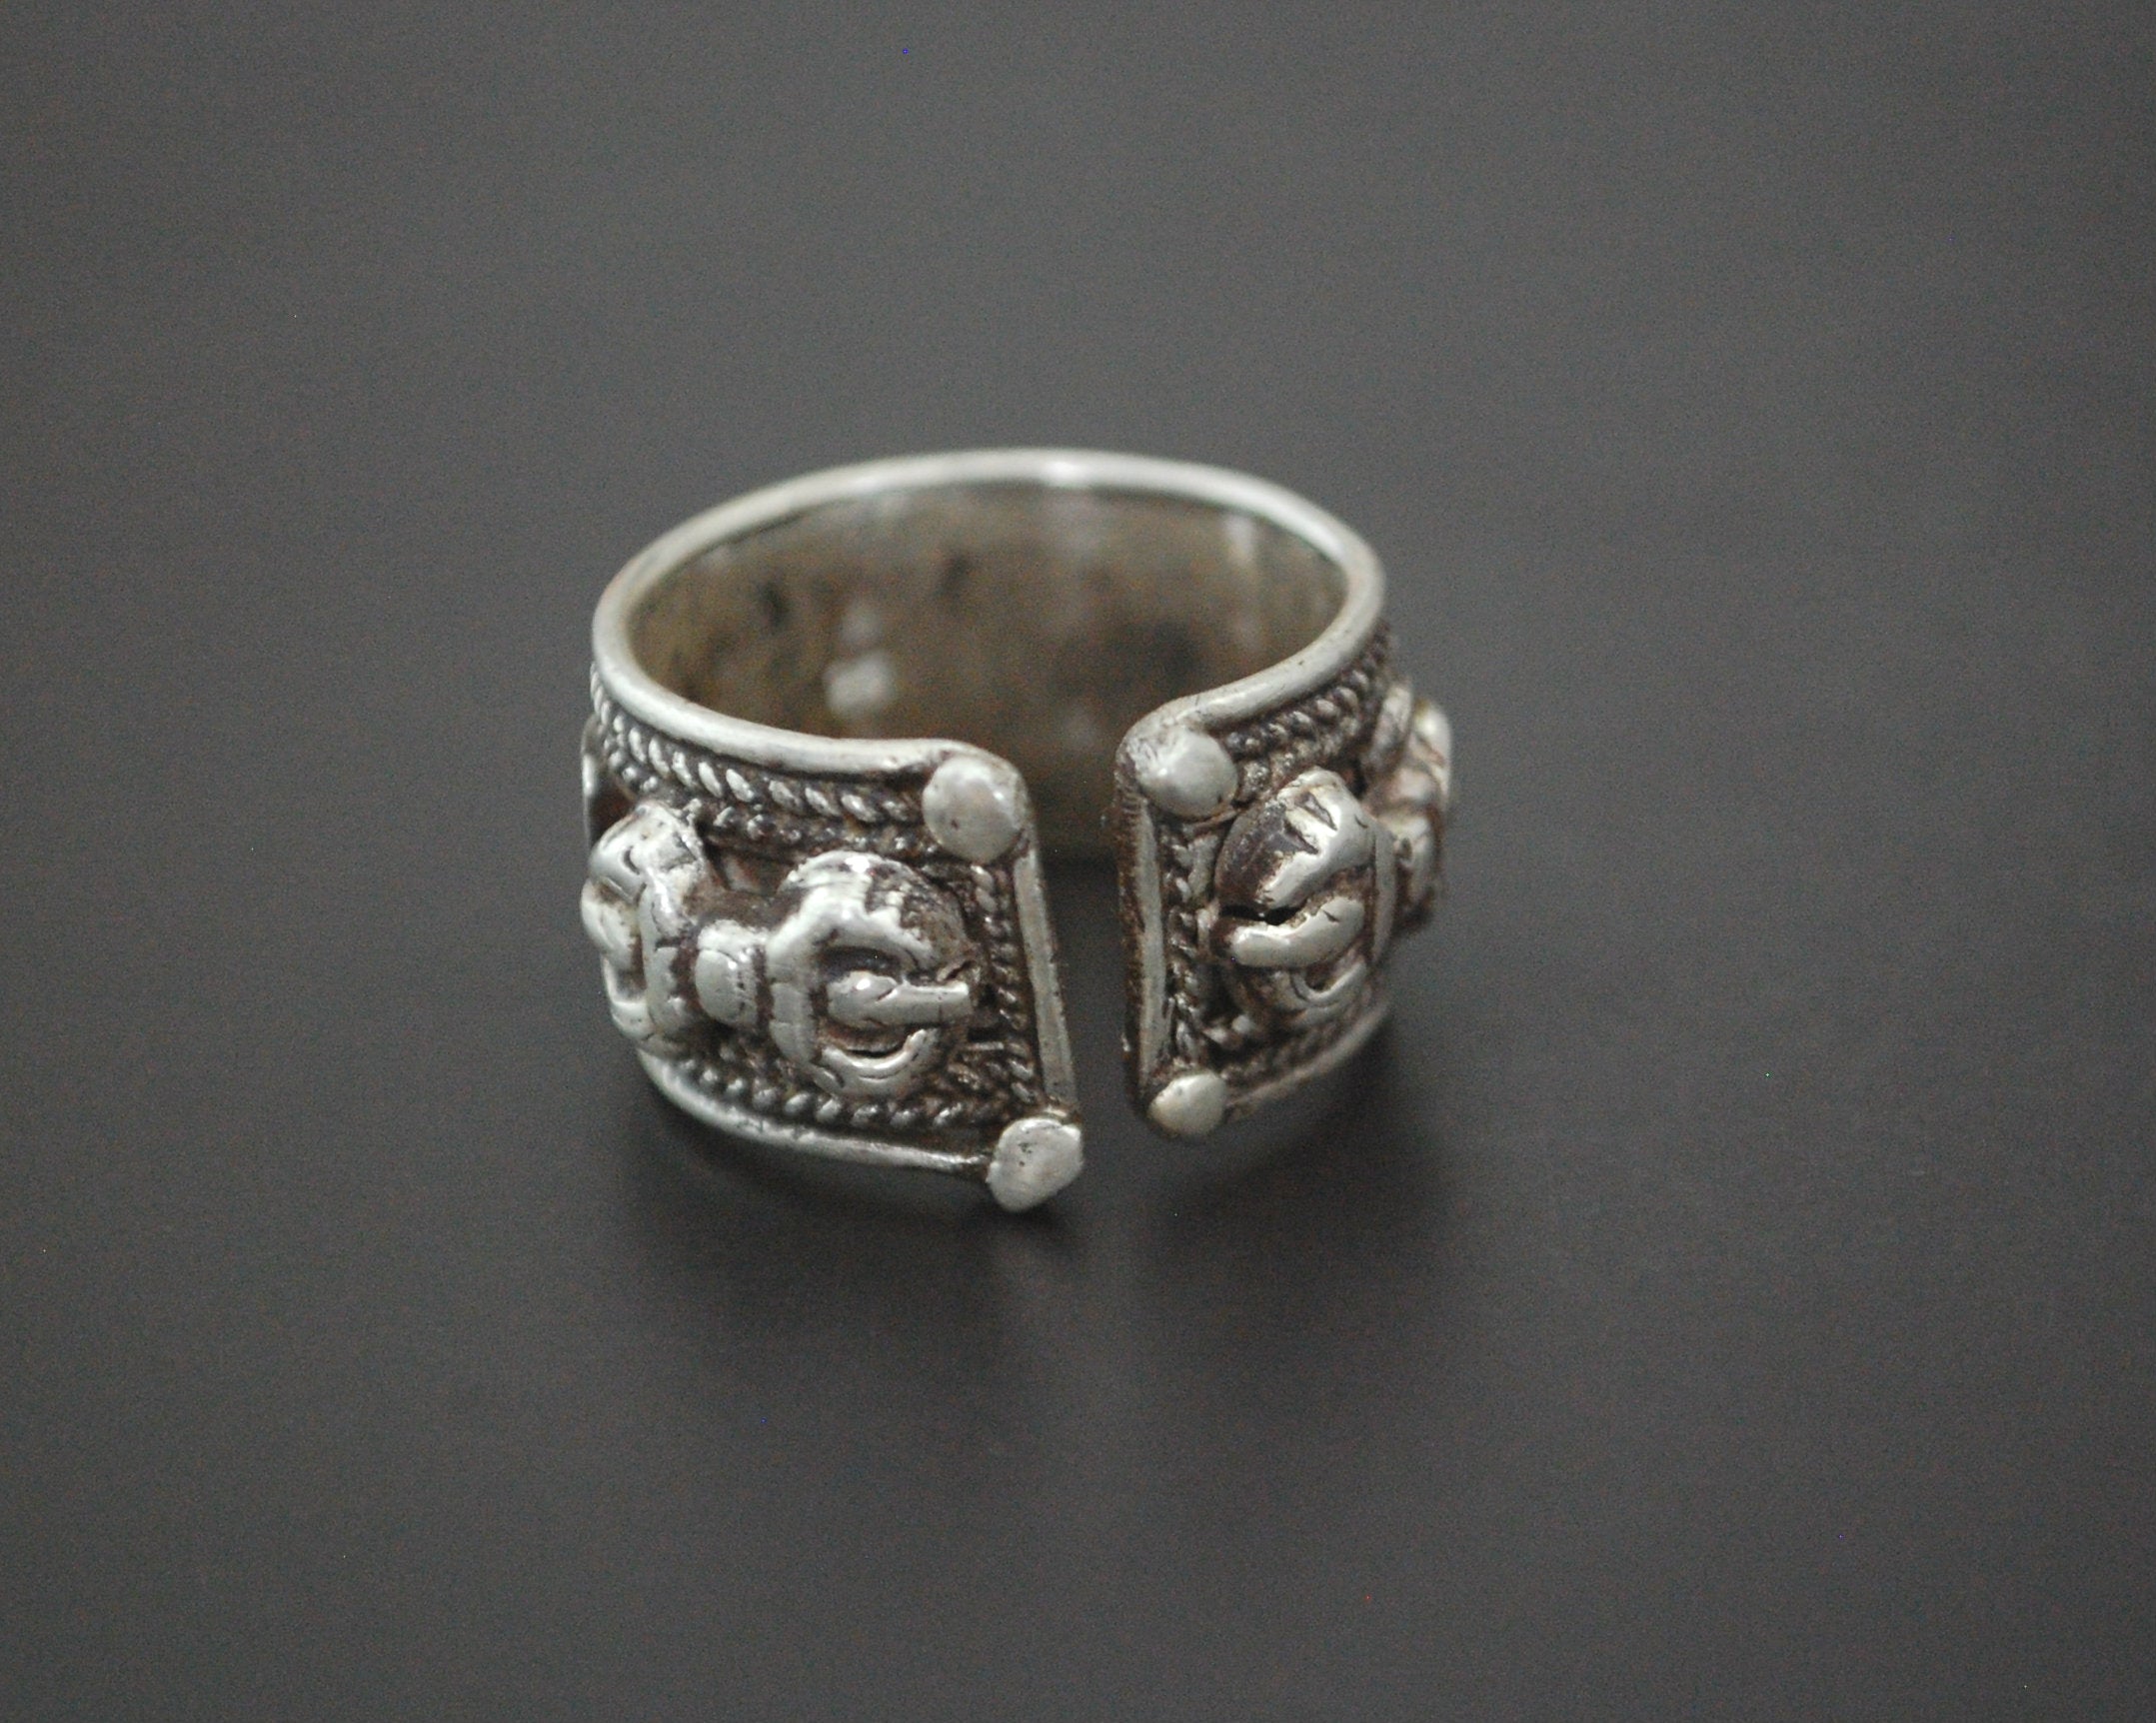 Mantra Om Band Ring from Nepal - Om Mani Padme Hum